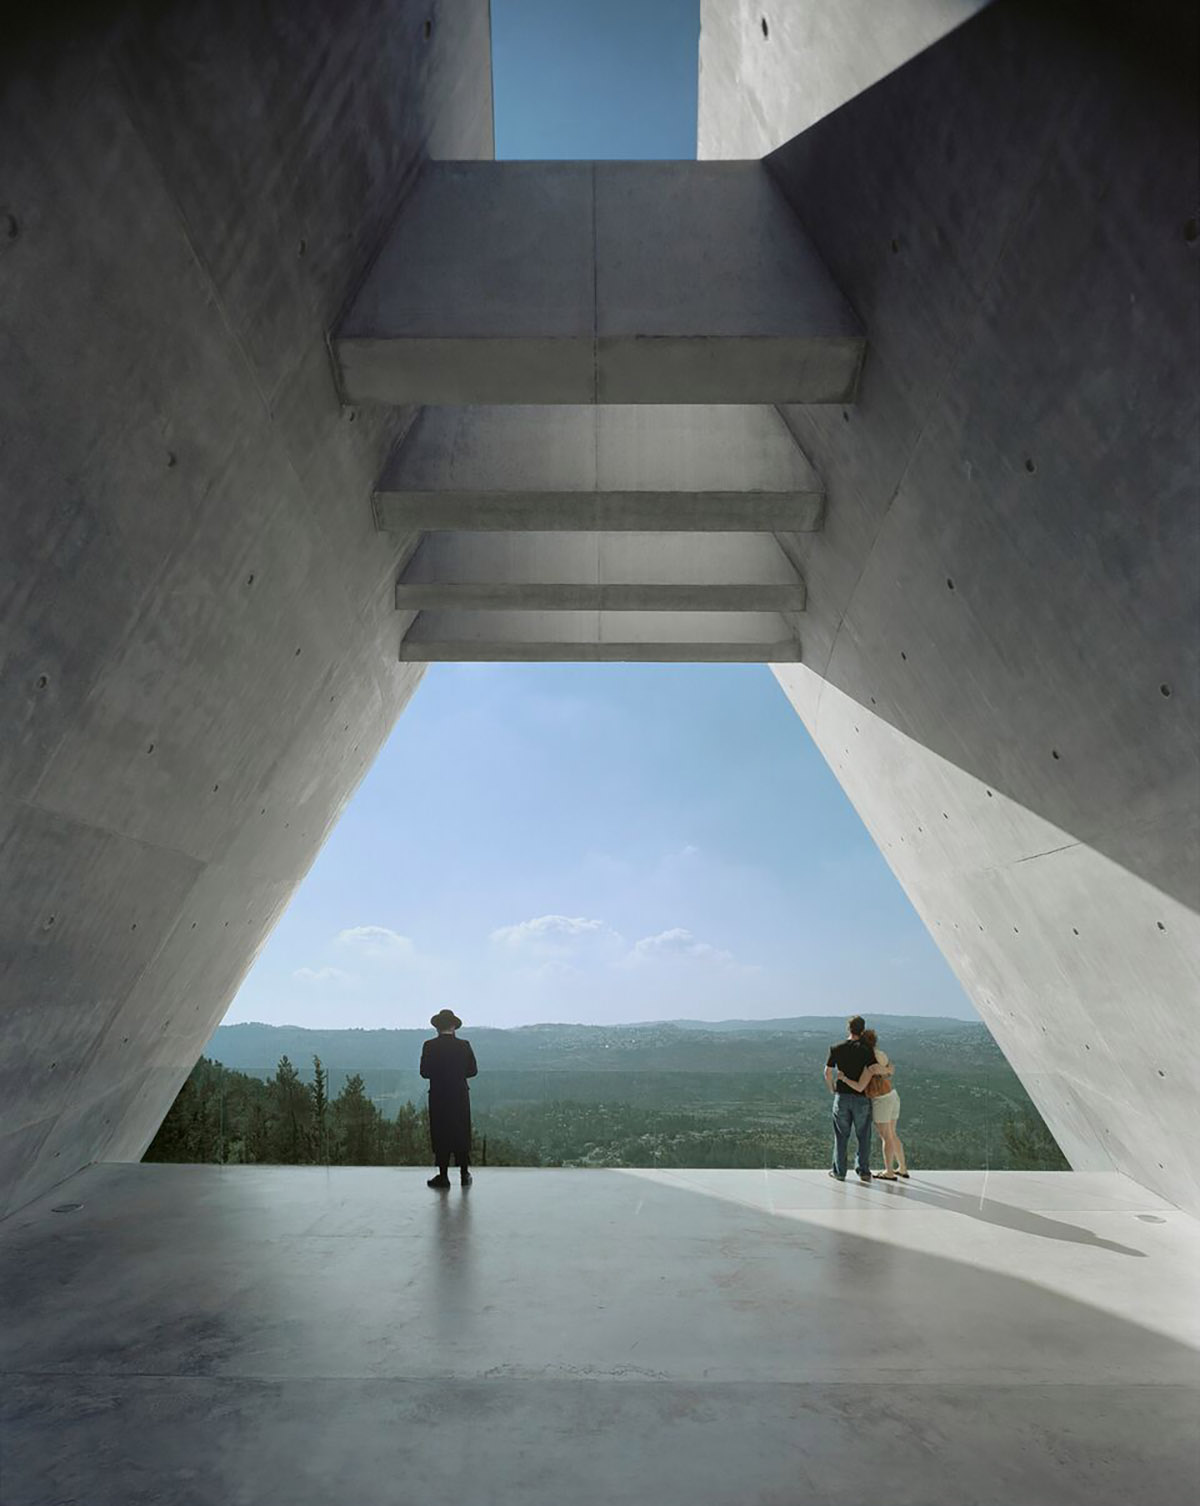 Yad Vashem Holocaust Museum. View at end of prison. Image by Timothy Hursley.